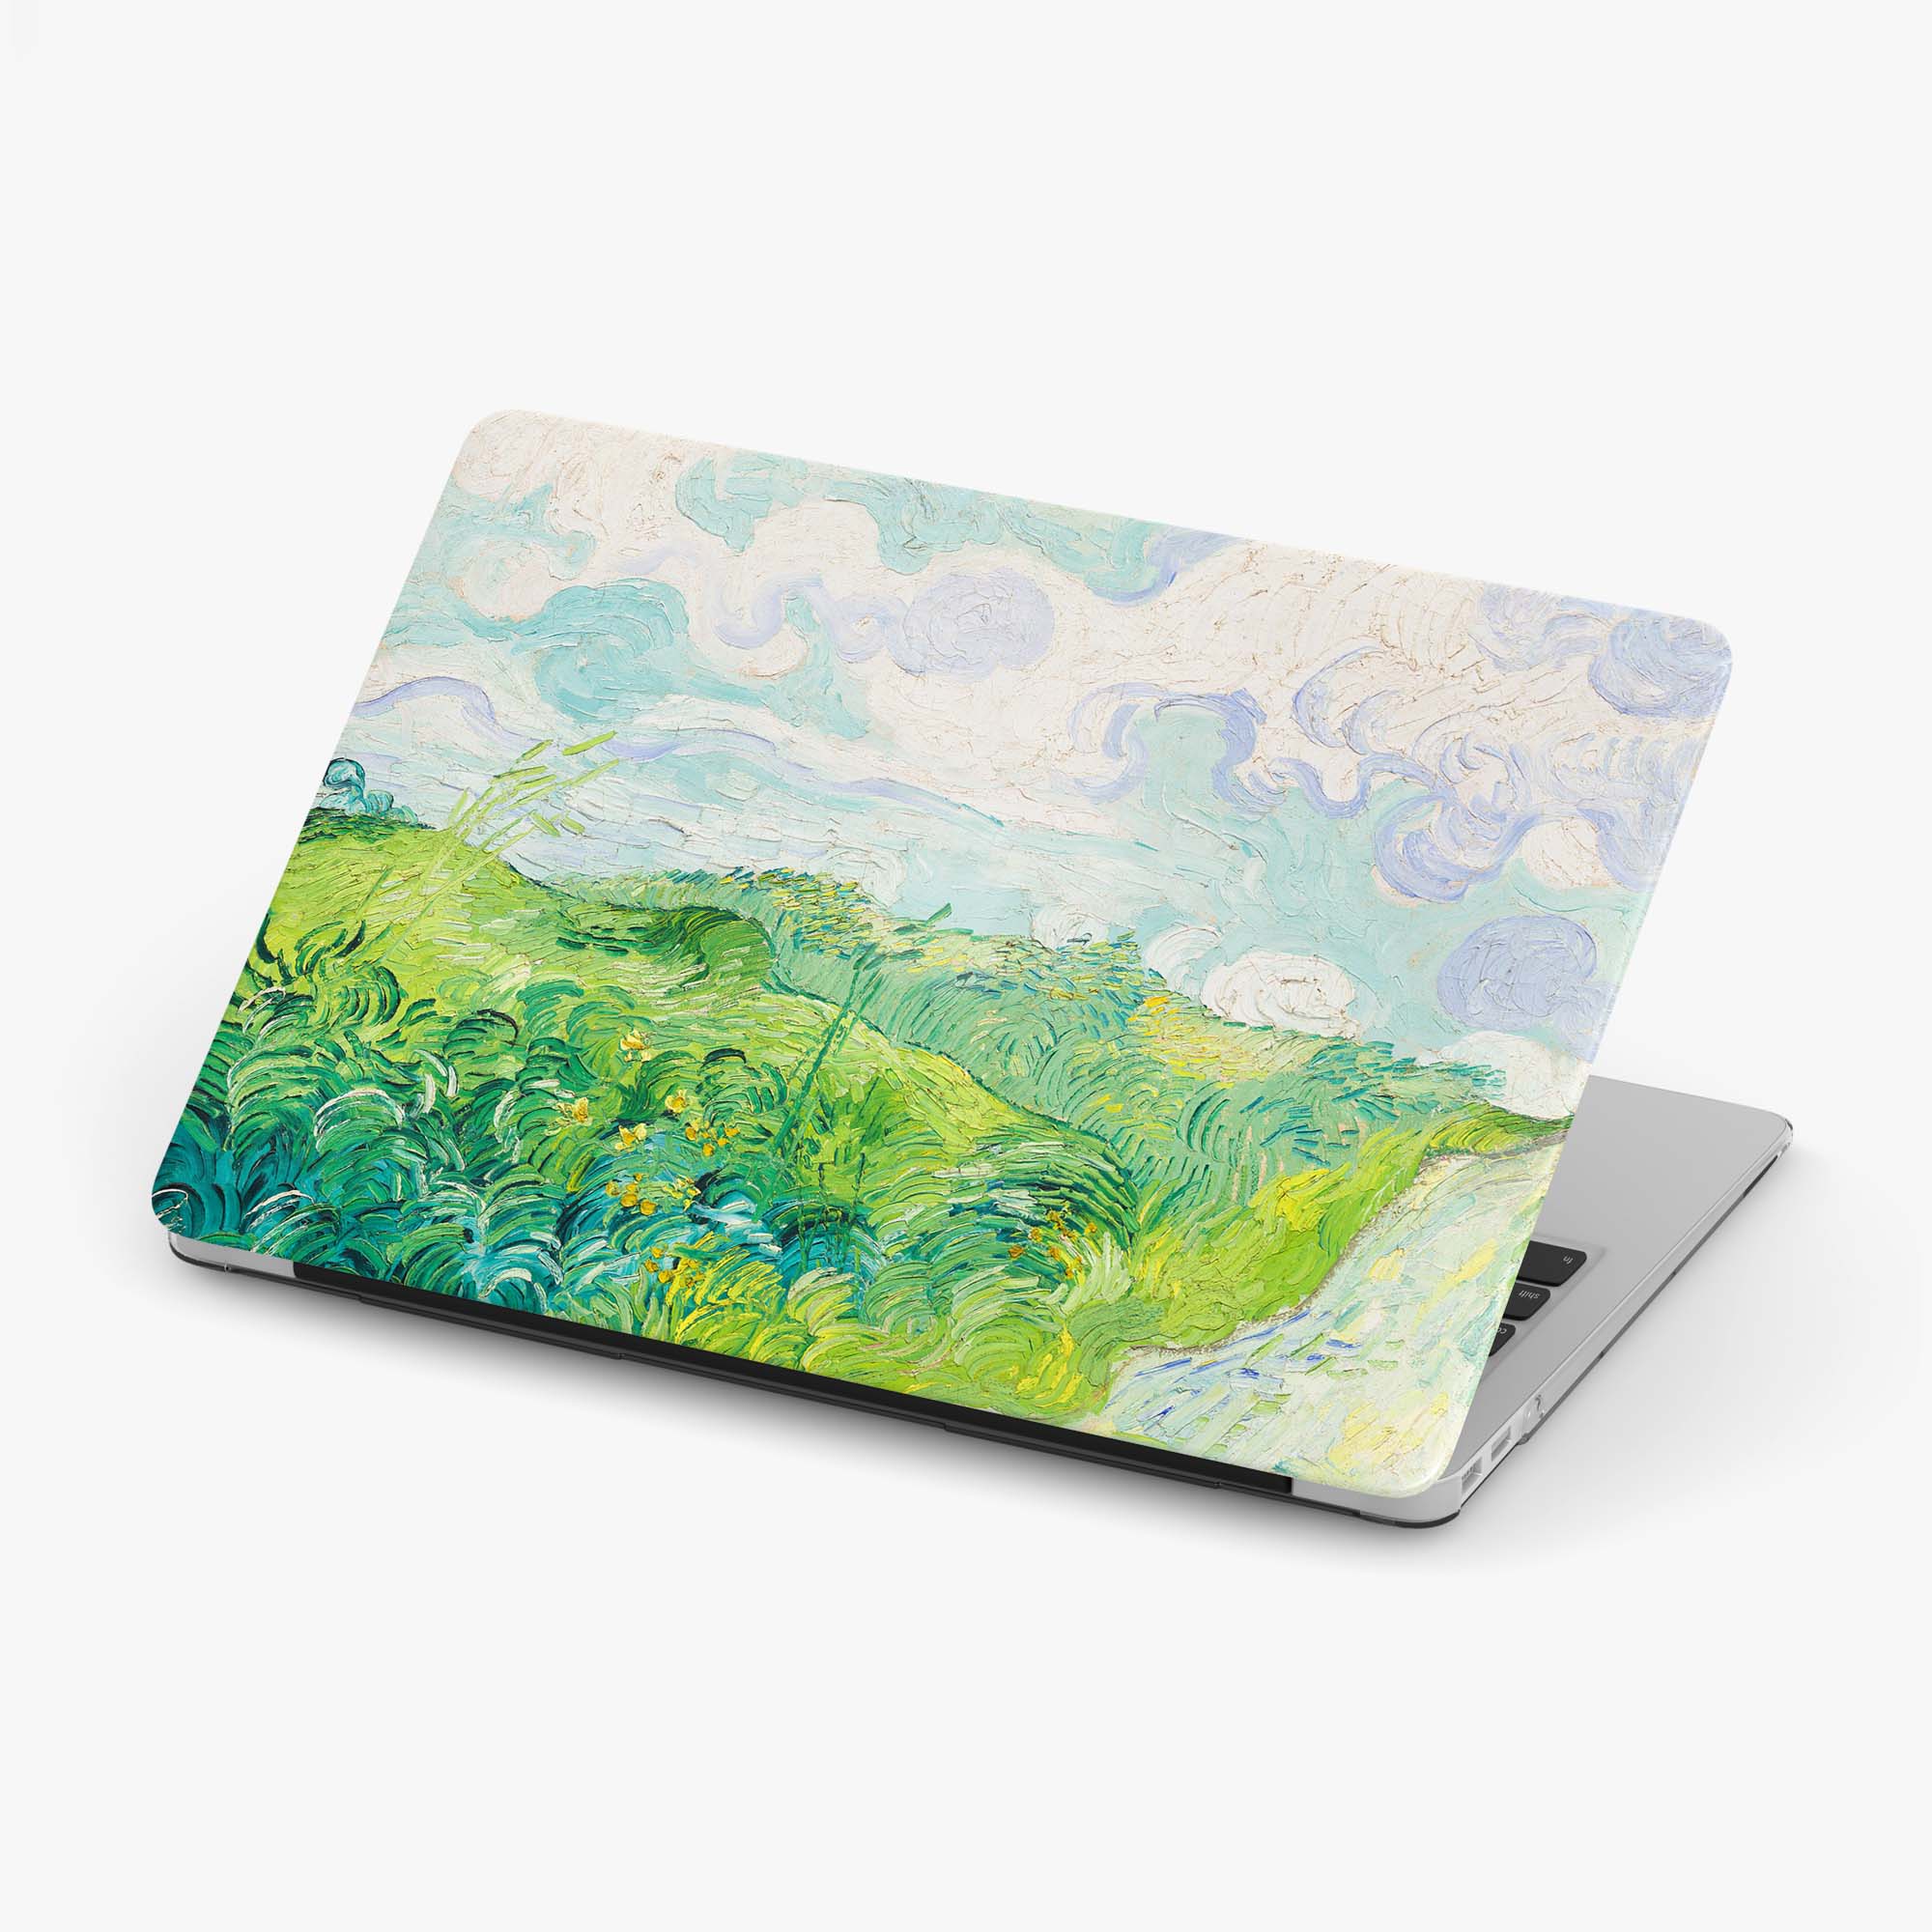 Personalized Name MacBook Case Van Gogh Painting Aesthetic Hard Cover